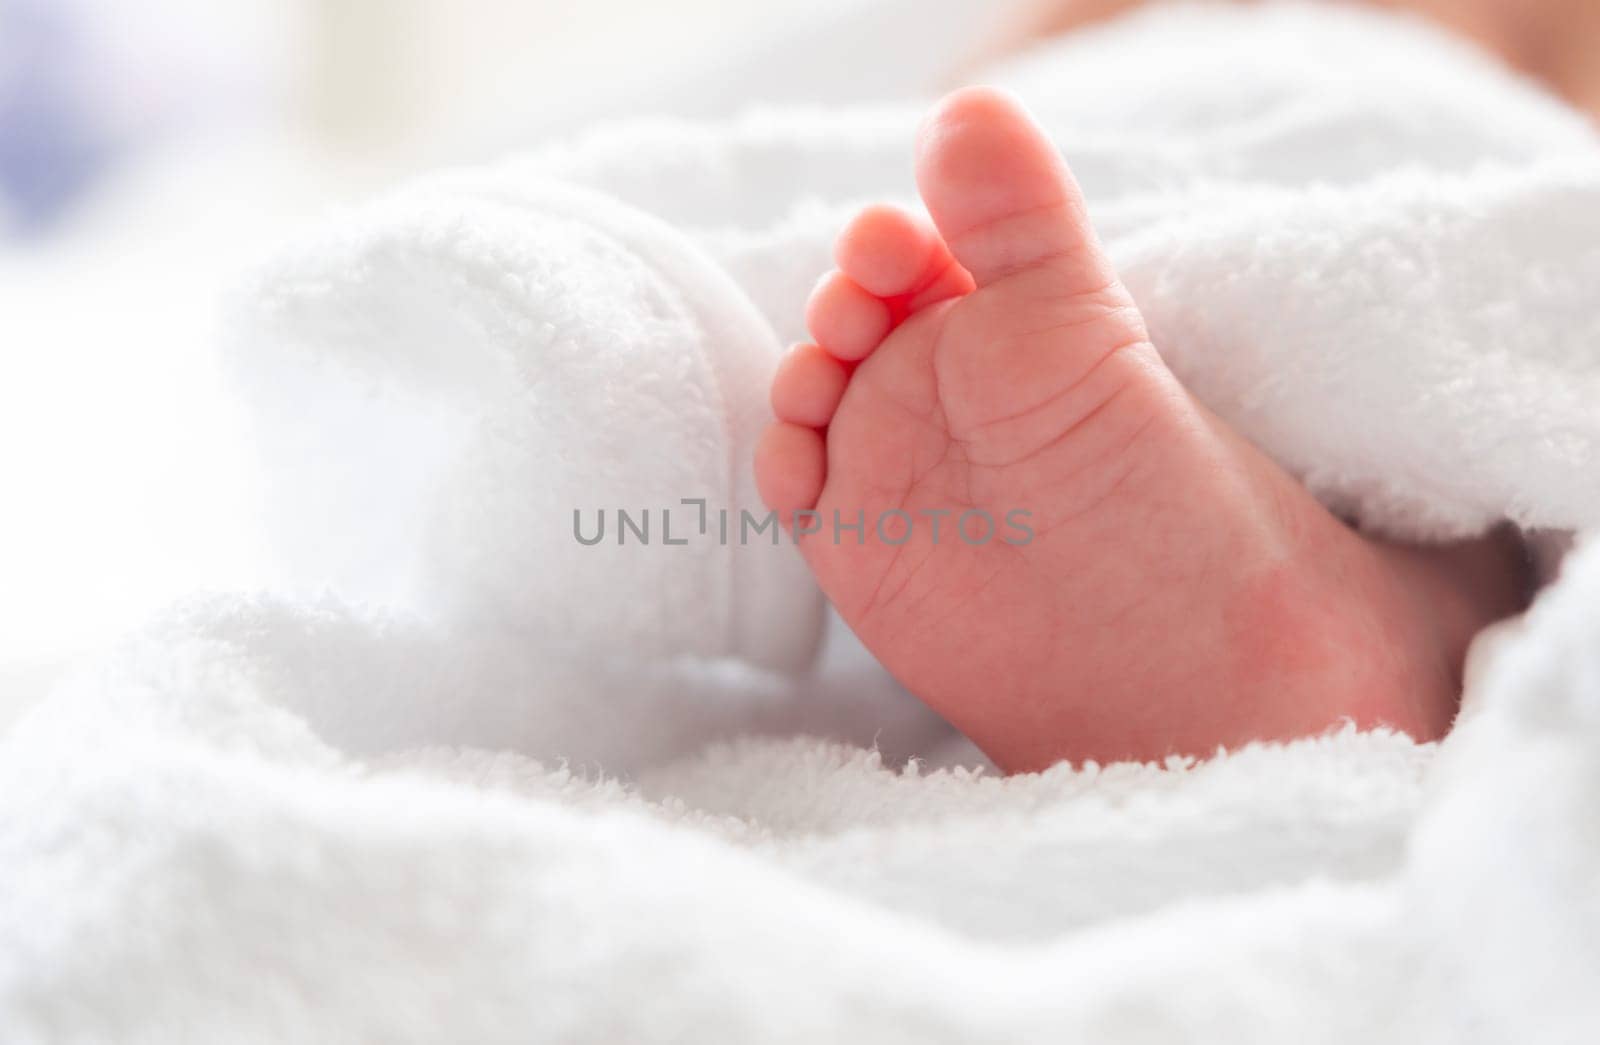 After experiencing its first bath, an infant's delicate foot playfully peeks out from a comforting soft white towel, signifying pure beginnings